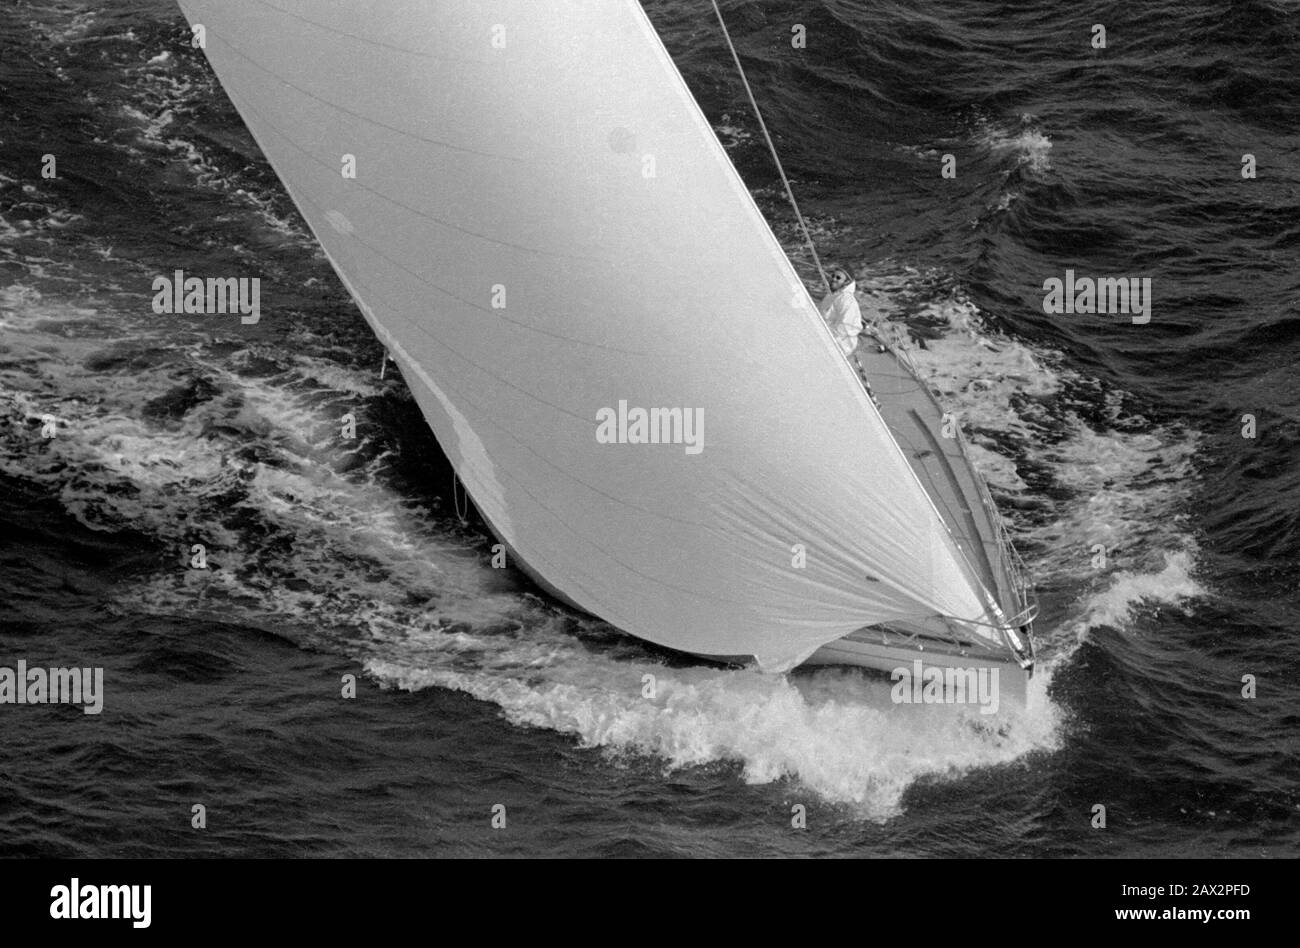 AJAXNETPHOTO. 1979. ENGLISH CHANNEL, ENGLAND.- ROUND THE ISLAND RACE - MORNING CLOUD IV, SKIPPERED BY OWNER EDWARD HEATH, SEEN HEADING TOWARD ST.CATHERINES POINT ON THE SOUTH SIDE OF THE ISLE OF WIGHT. PHOTO:JONATHAN EASTLAND/AJAX REF:79 4048 Stock Photo